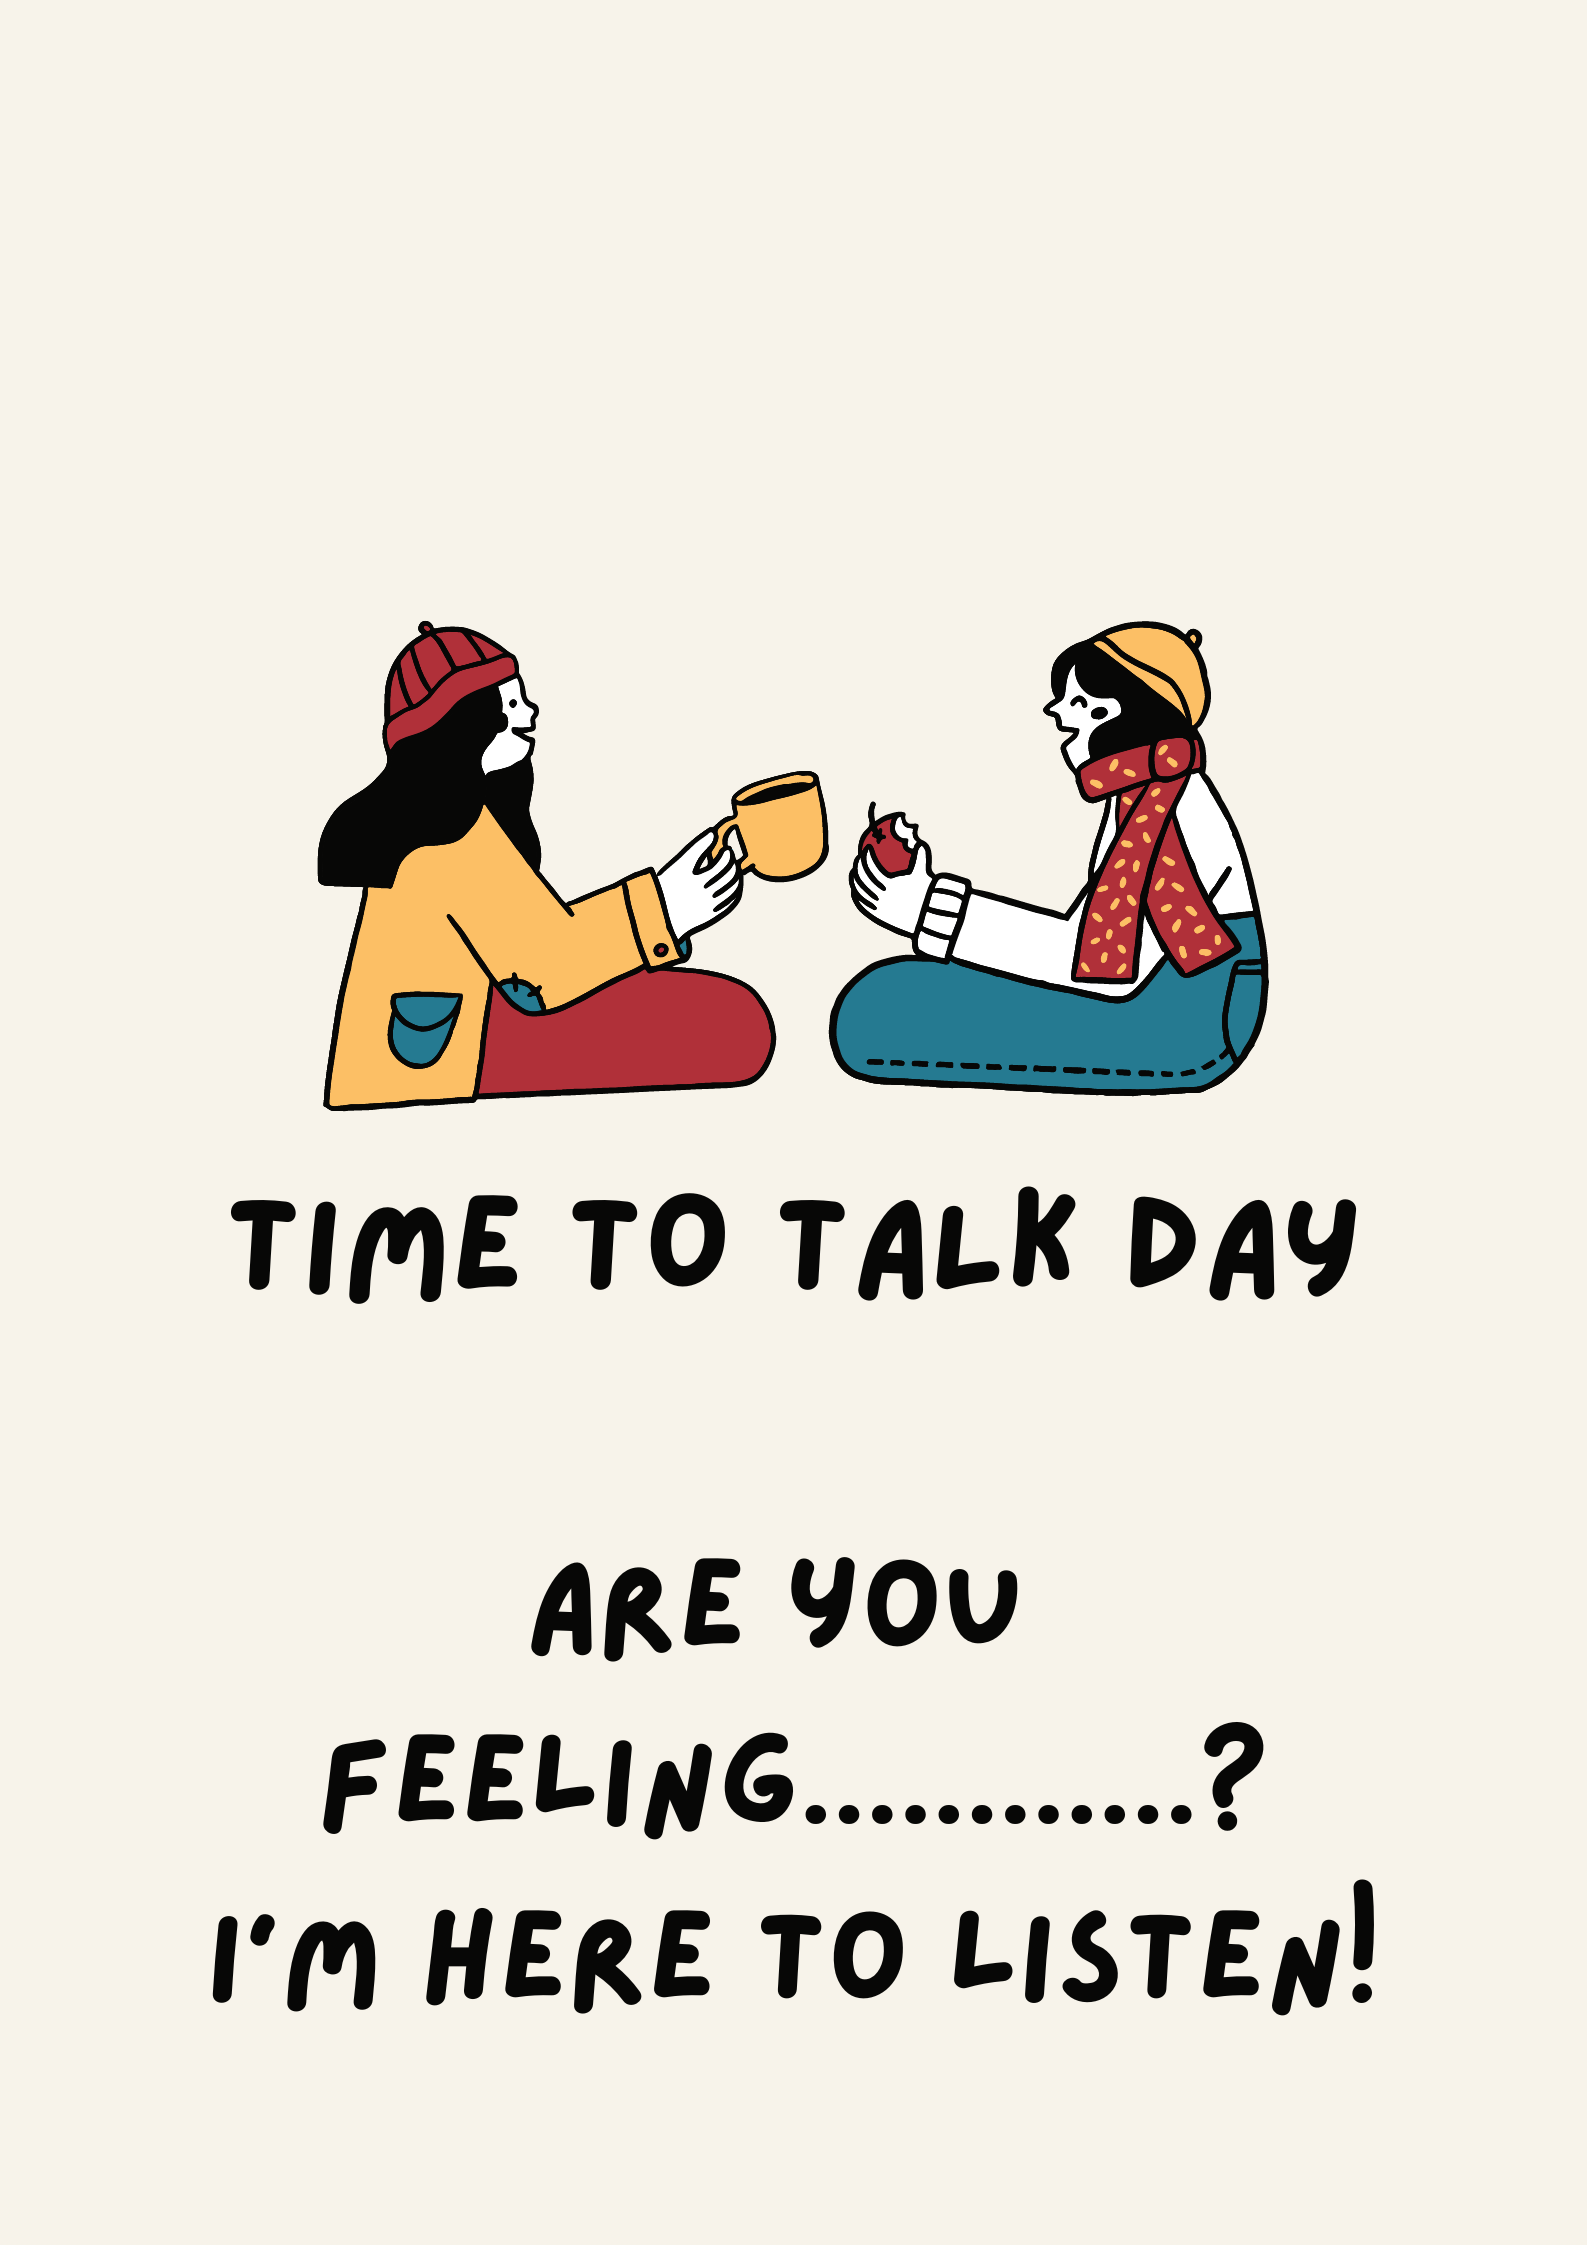 Make space in your day for a conversation about mental health this Time to Talk Day.